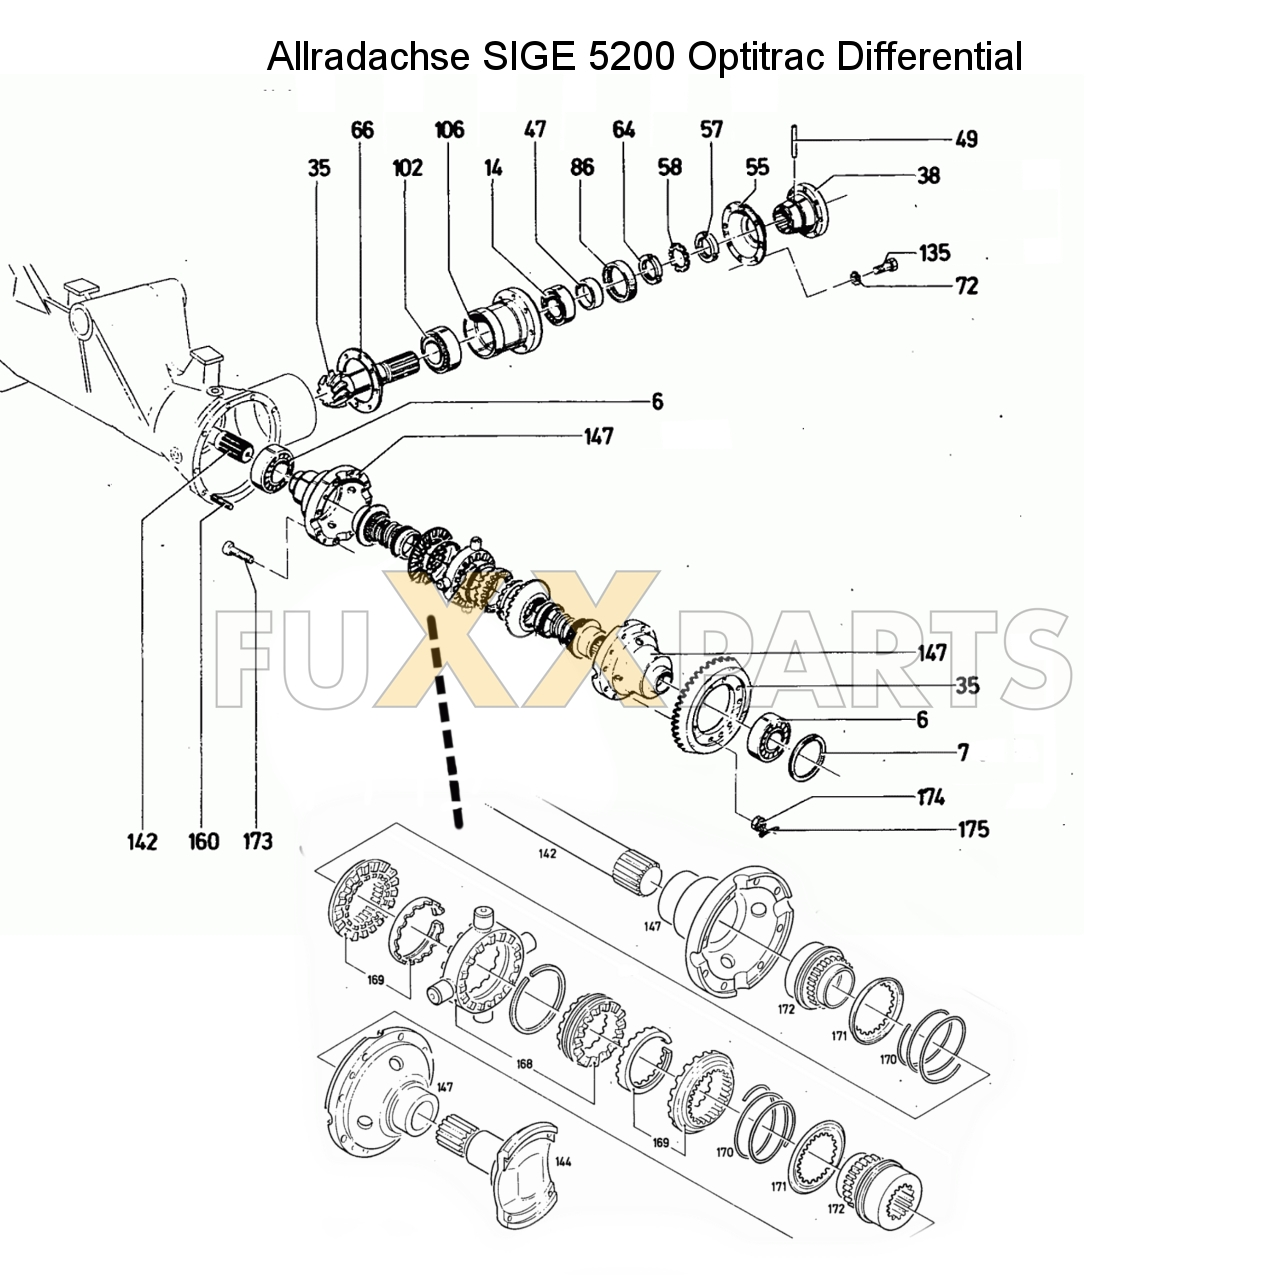 D 10006 Allradachse SIGE 5200 Optitrac Differential